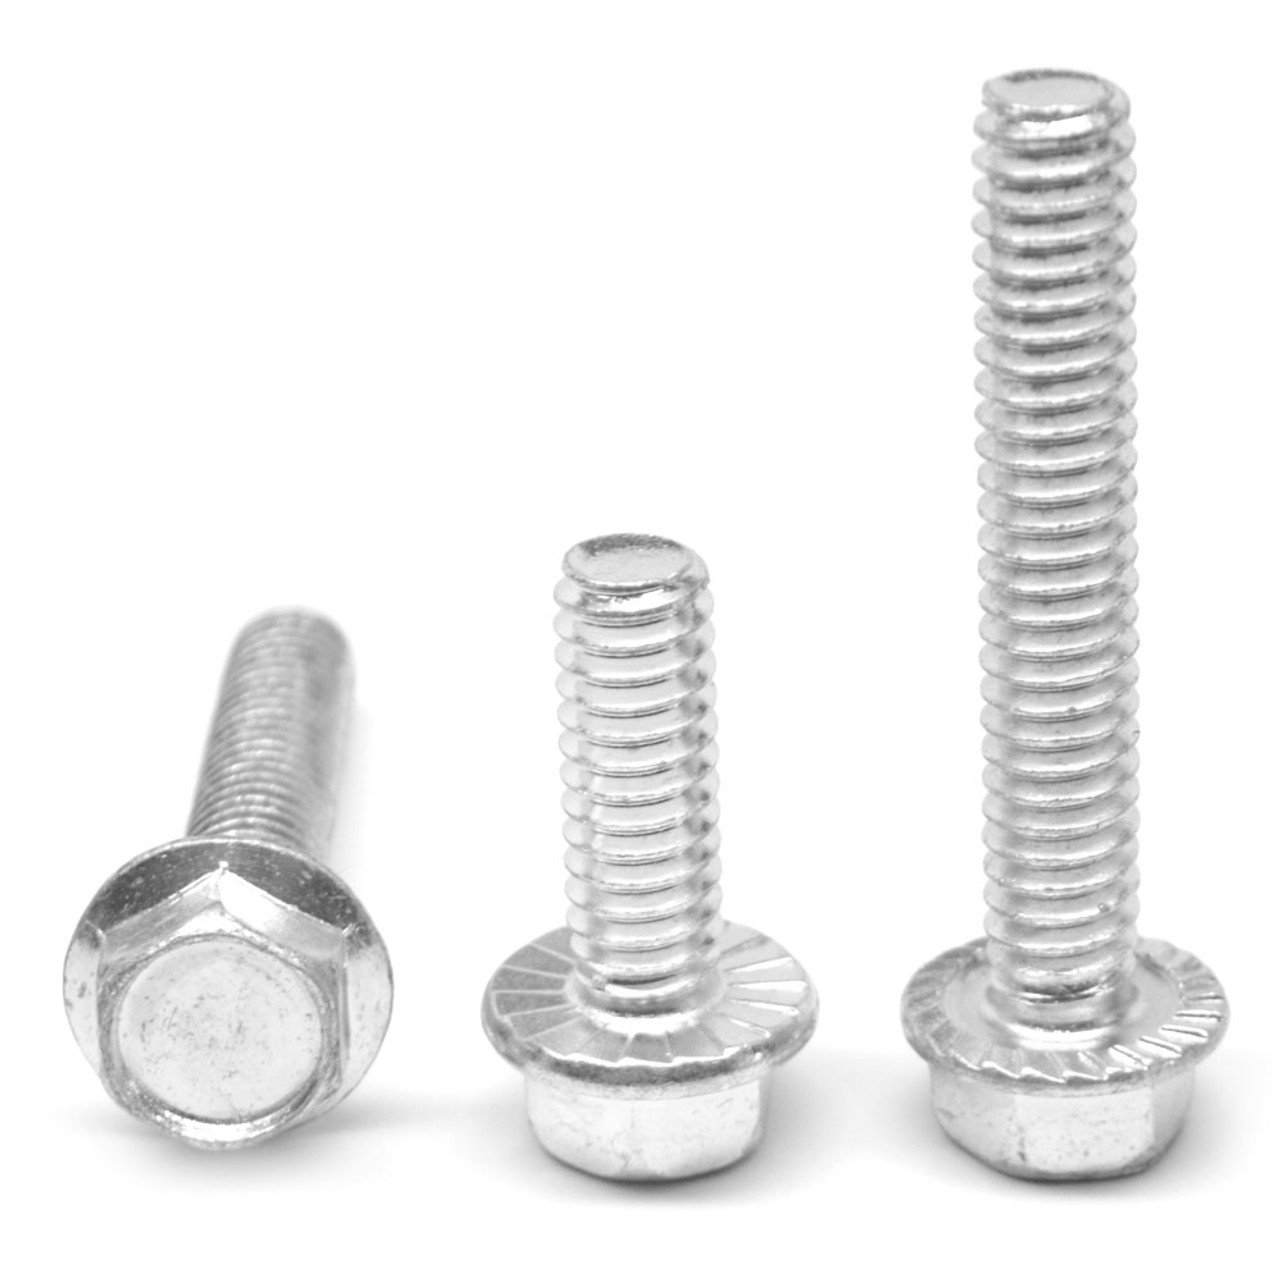 #10-32 x 1 1/2" (FT) Fine Thread Hex Flange Screw with Serration Case Hardened Low Carbon Steel Zinc Plated